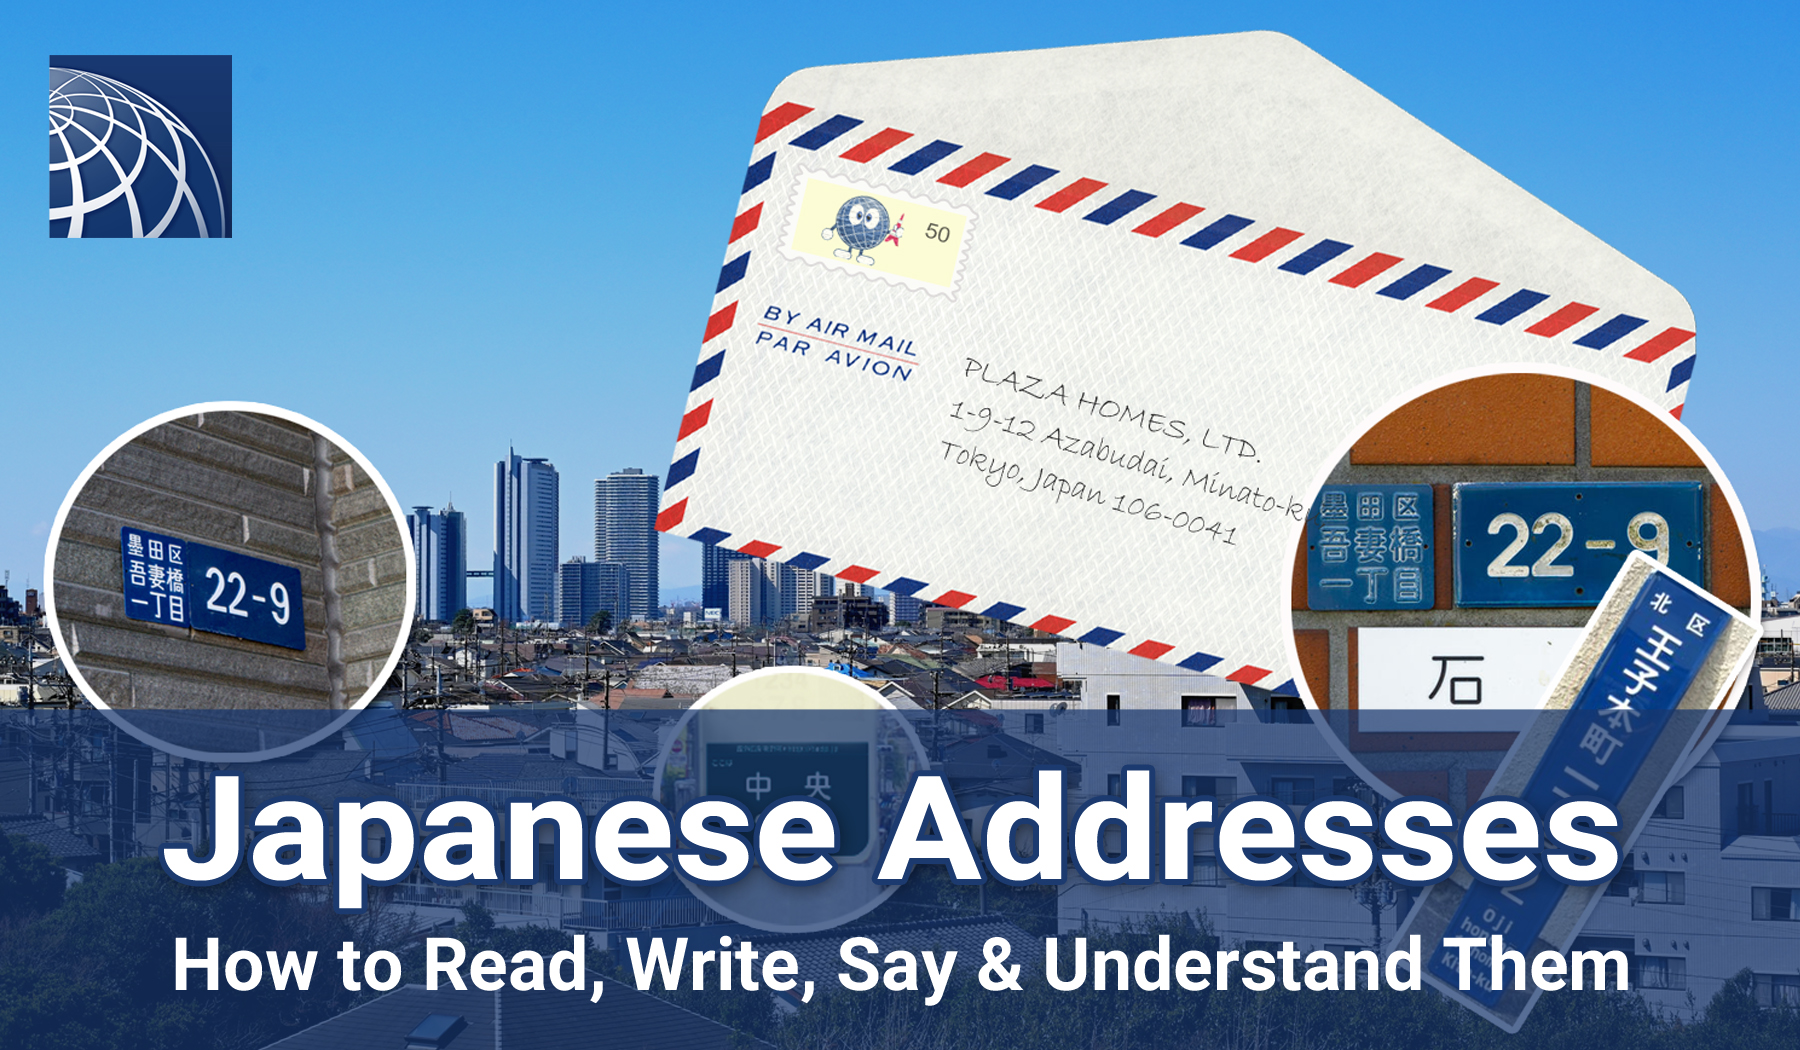 Japanese Addresses: How to Read, Write, Say & Understand Them - PLAZA HOMES